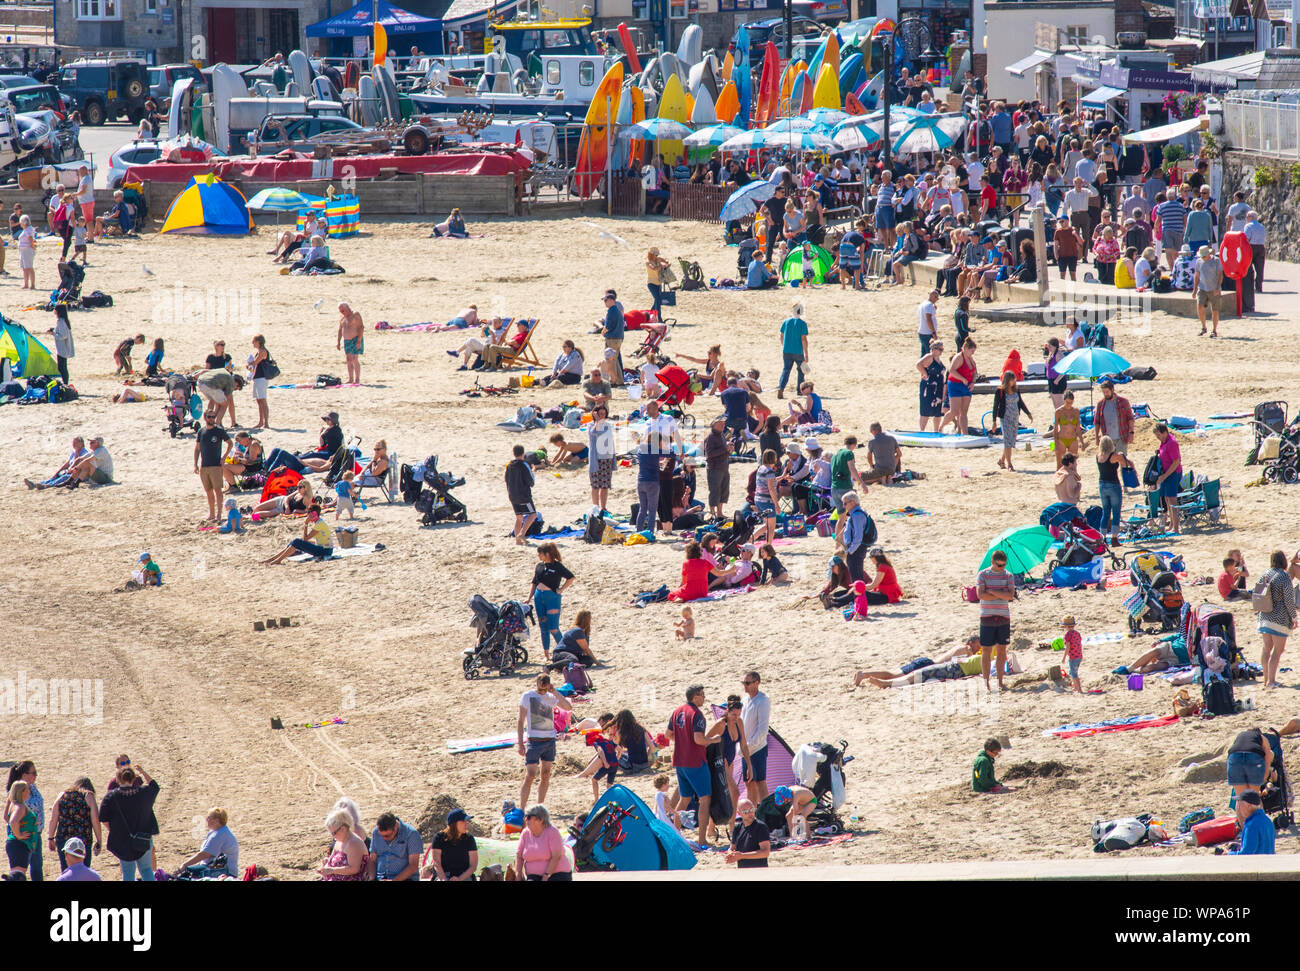 Lyme Regis, Dorset, UK. 8th September 2019. UK Weather: Crowds flock to the beach at the seaside resort of Lyme Regis to enjoy an afternoon of glorious warm sunshine. Credit: Celia McMahon/Alamy Live News Stock Photo